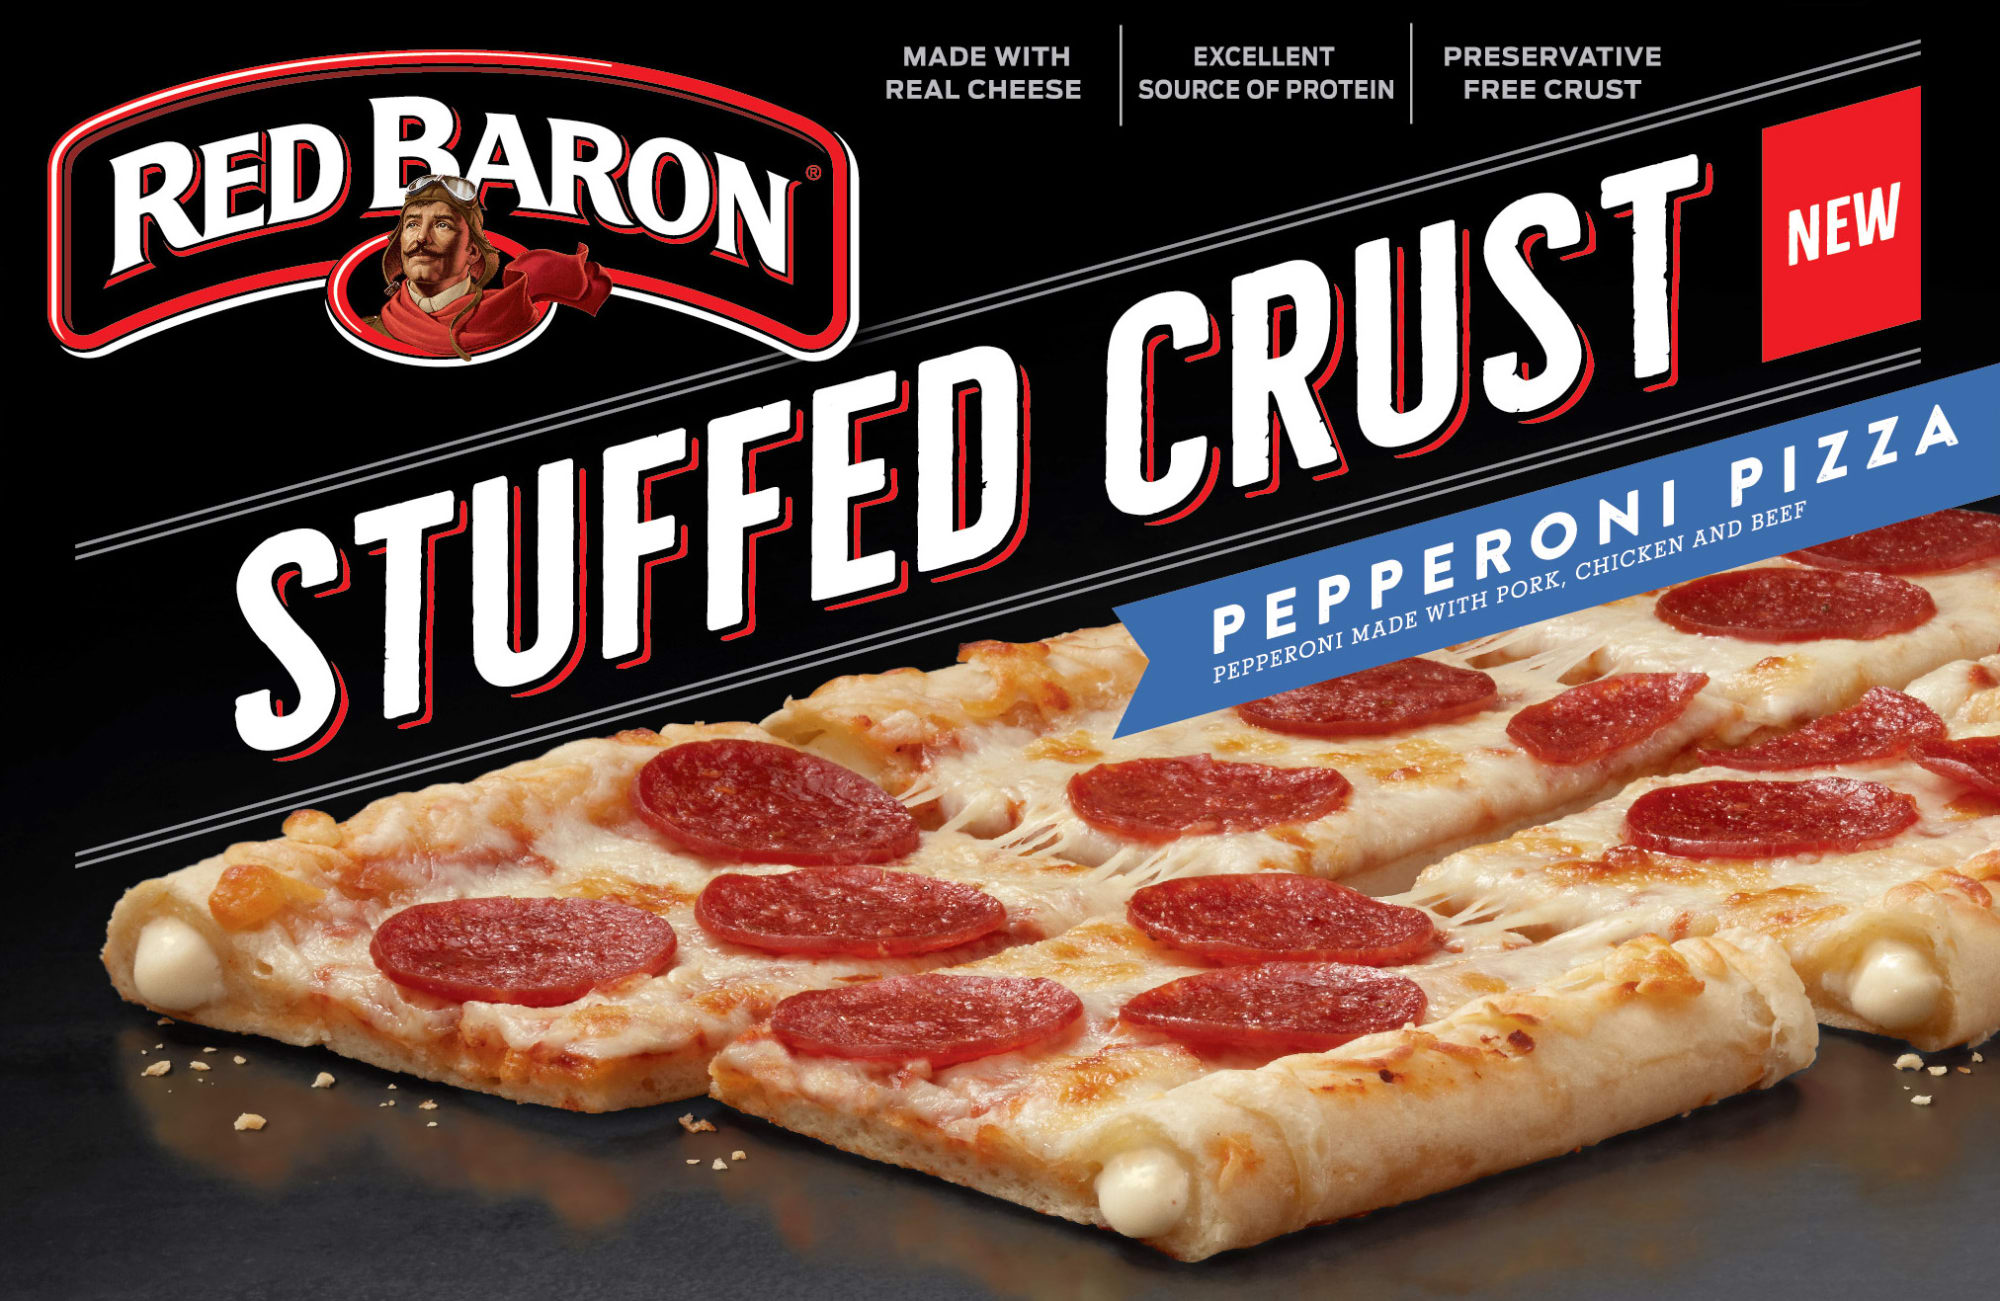 Red Baron new: Ranking the Pizza Melts and Stuffed Crust Pizza. guiltyeats....